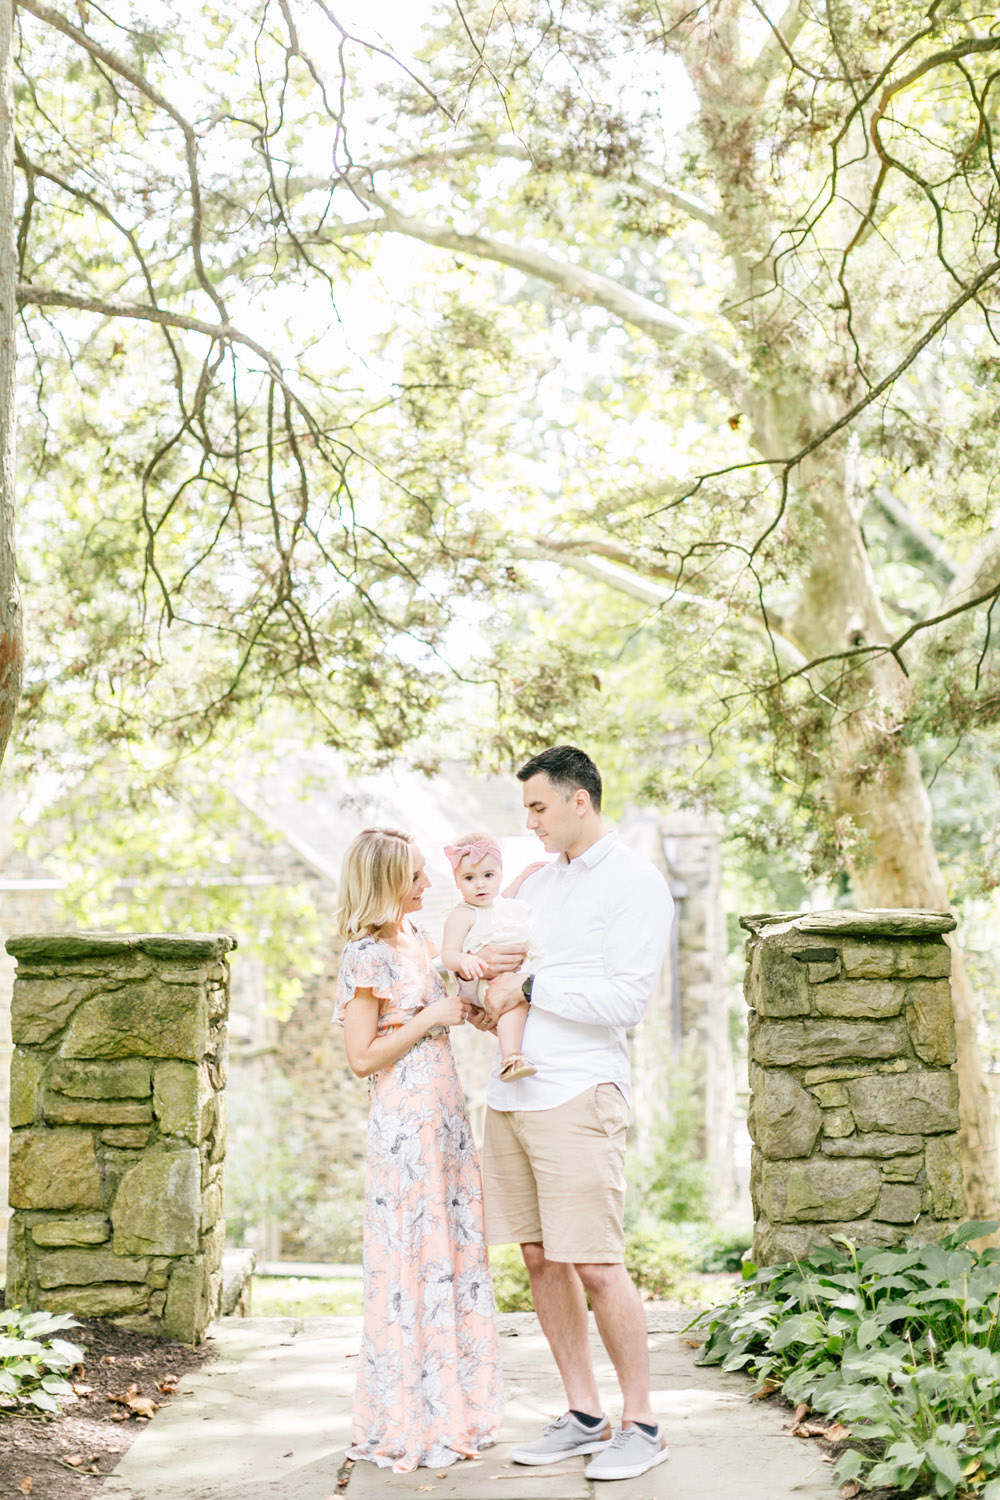 Emma One Year Family Session Ridley Creek Parque Emily Wren Photography 33